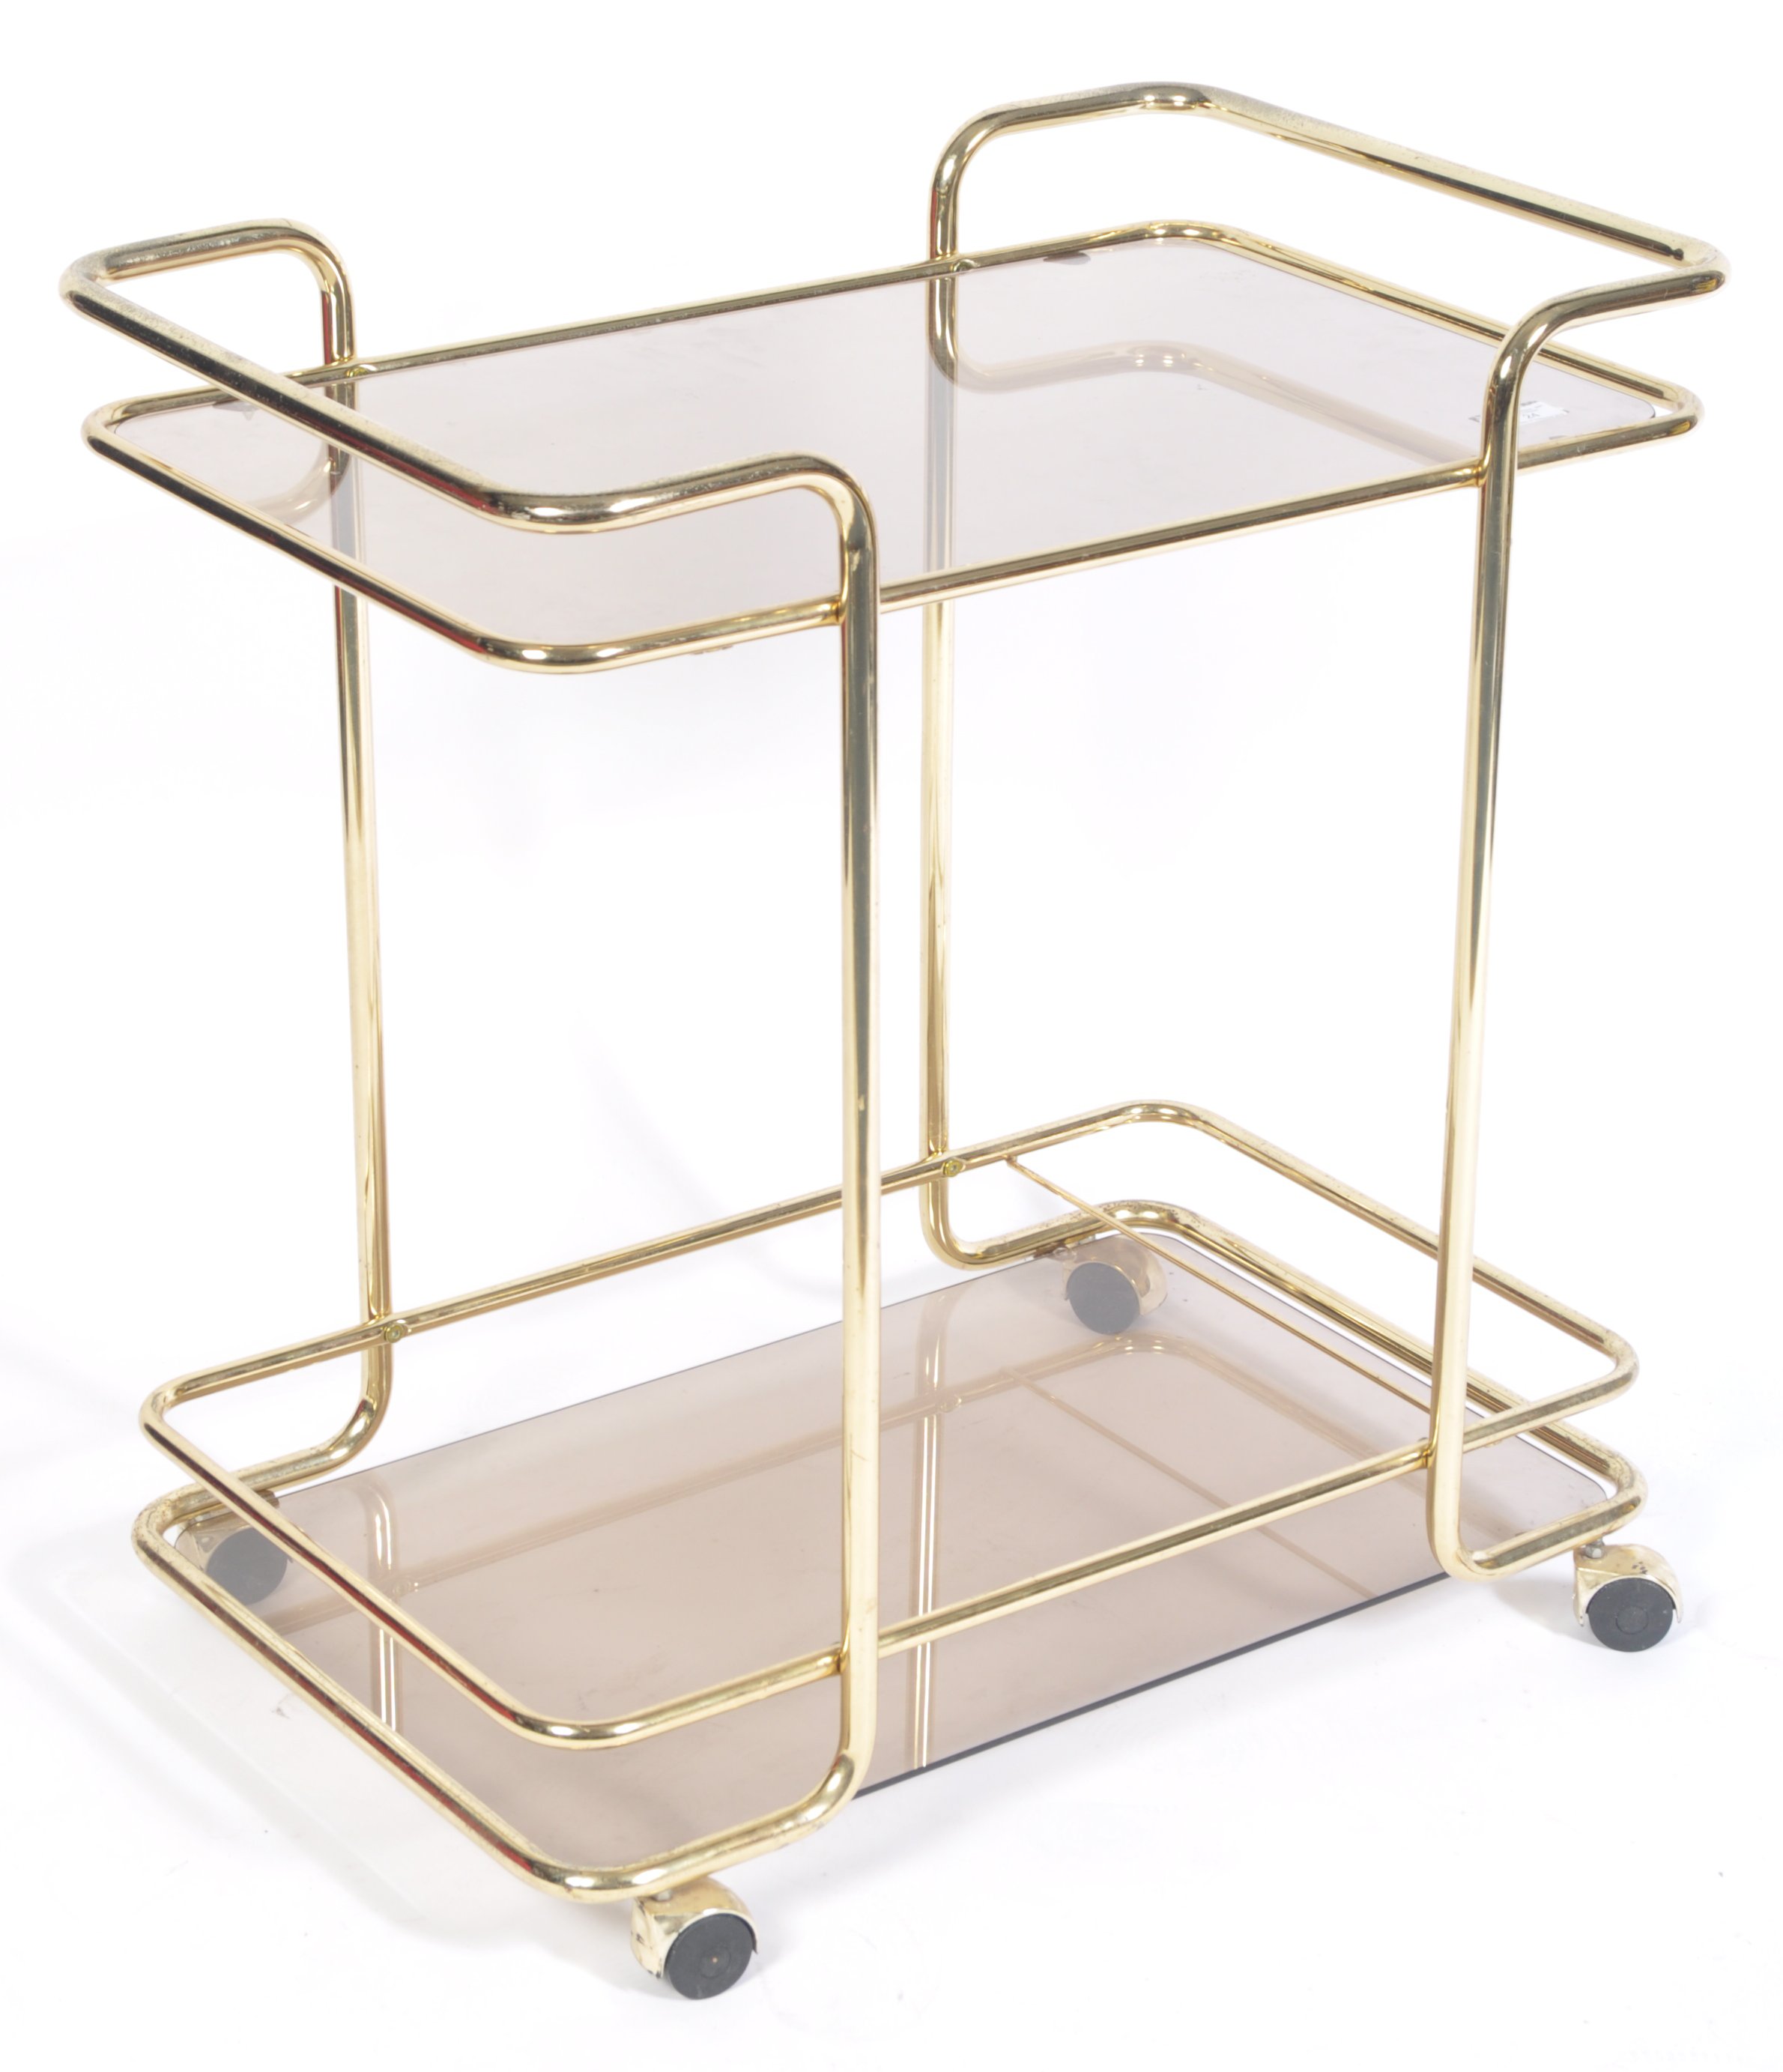 ITALIAN 1970'S BRASS AND GLASS BAR CART DRINKS / COCKTAIL TROLLEY - Image 2 of 4